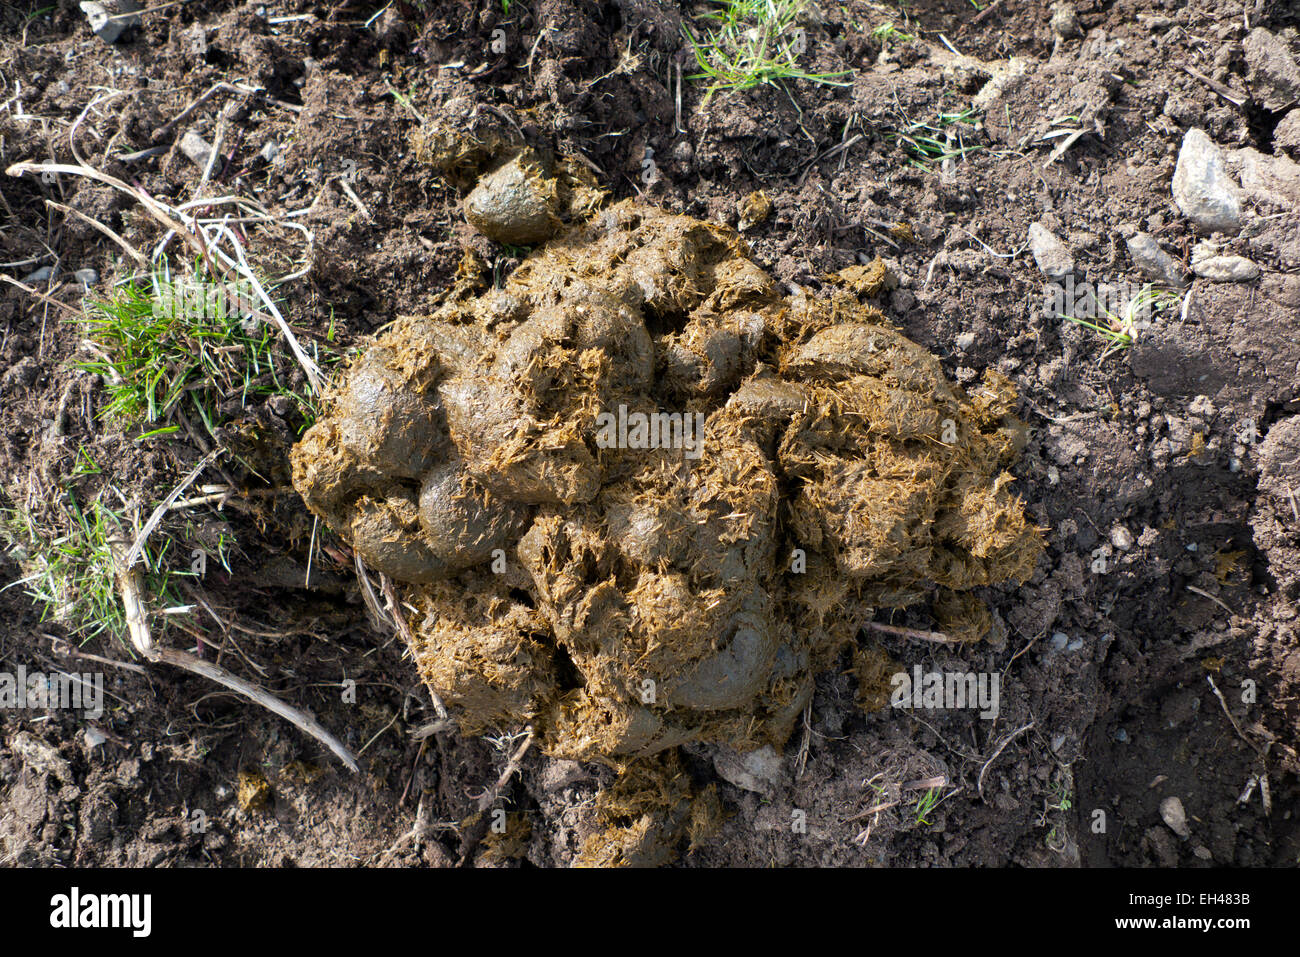 Carmarthenshire, Wales, UK. 6th March 2015. Fresh horse manure on a fine sunny day in Carmarthenshire Wales  Warmer temperatures held a real promise of spring today.  Kathy deWitt/AlamyLiveNews Stock Photo